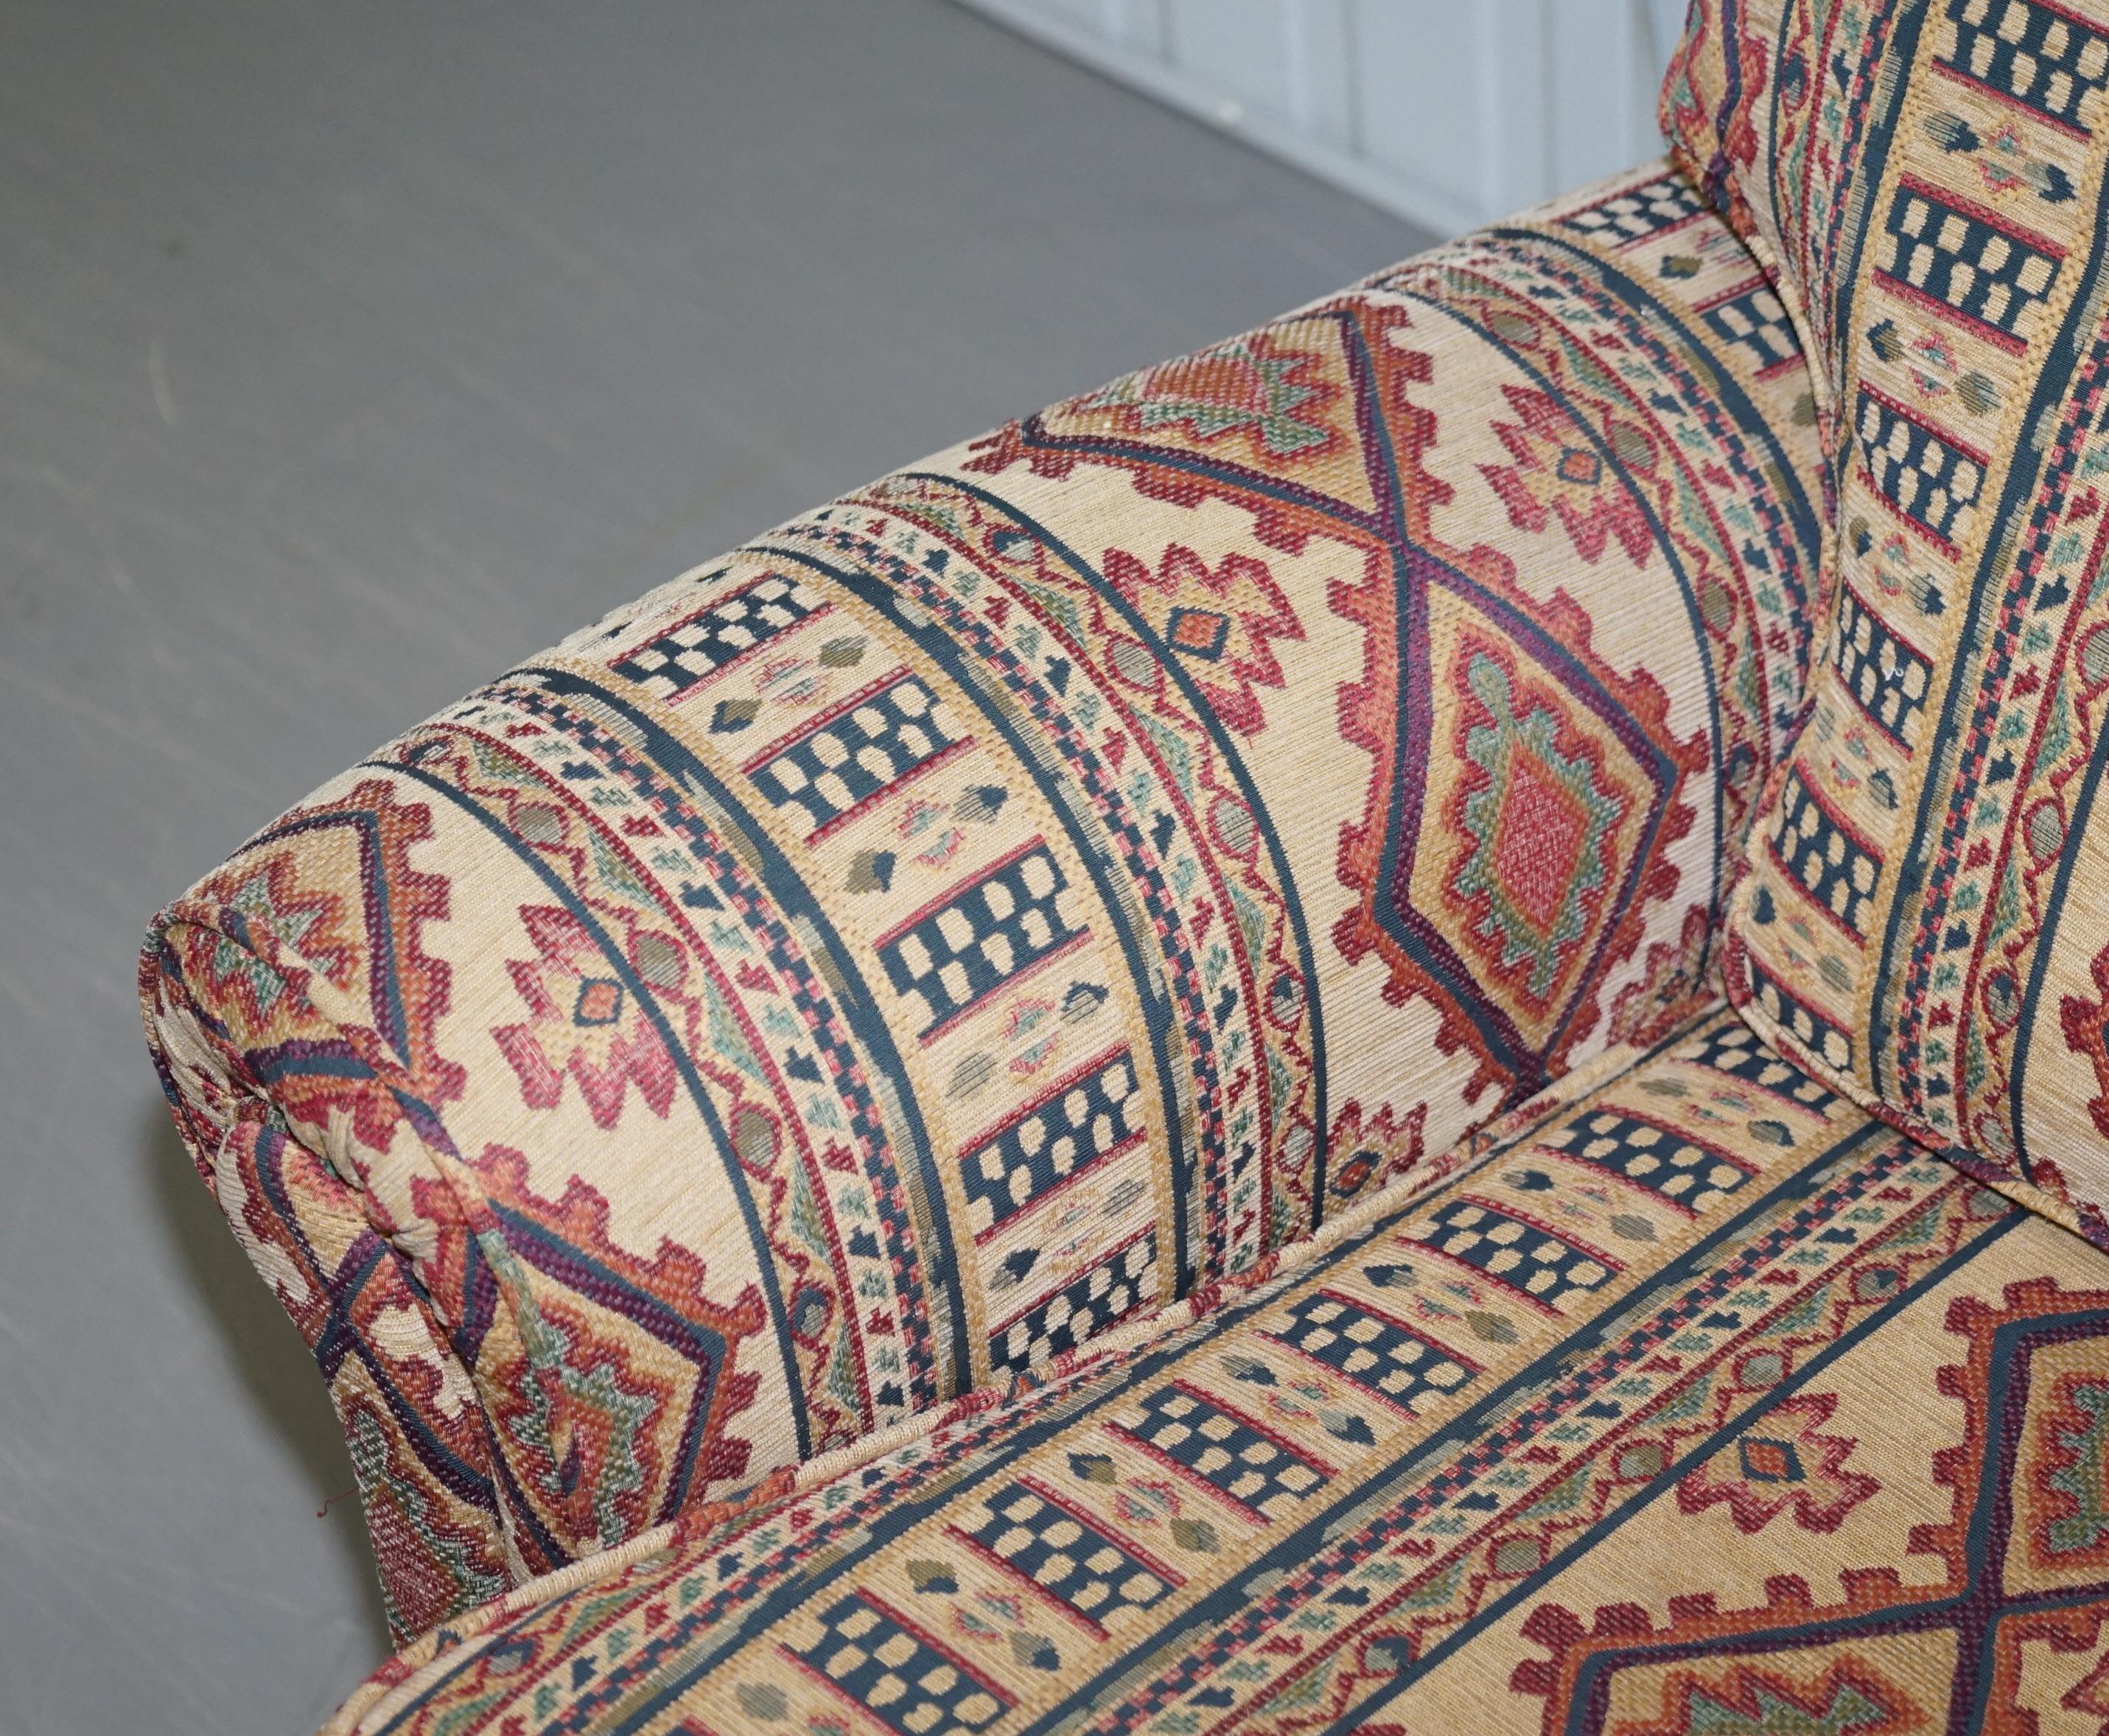 Upholstery Midcentury Fully Sprung Art Deco Style Kilim Rug Upholstered Sofa Part of Suite For Sale